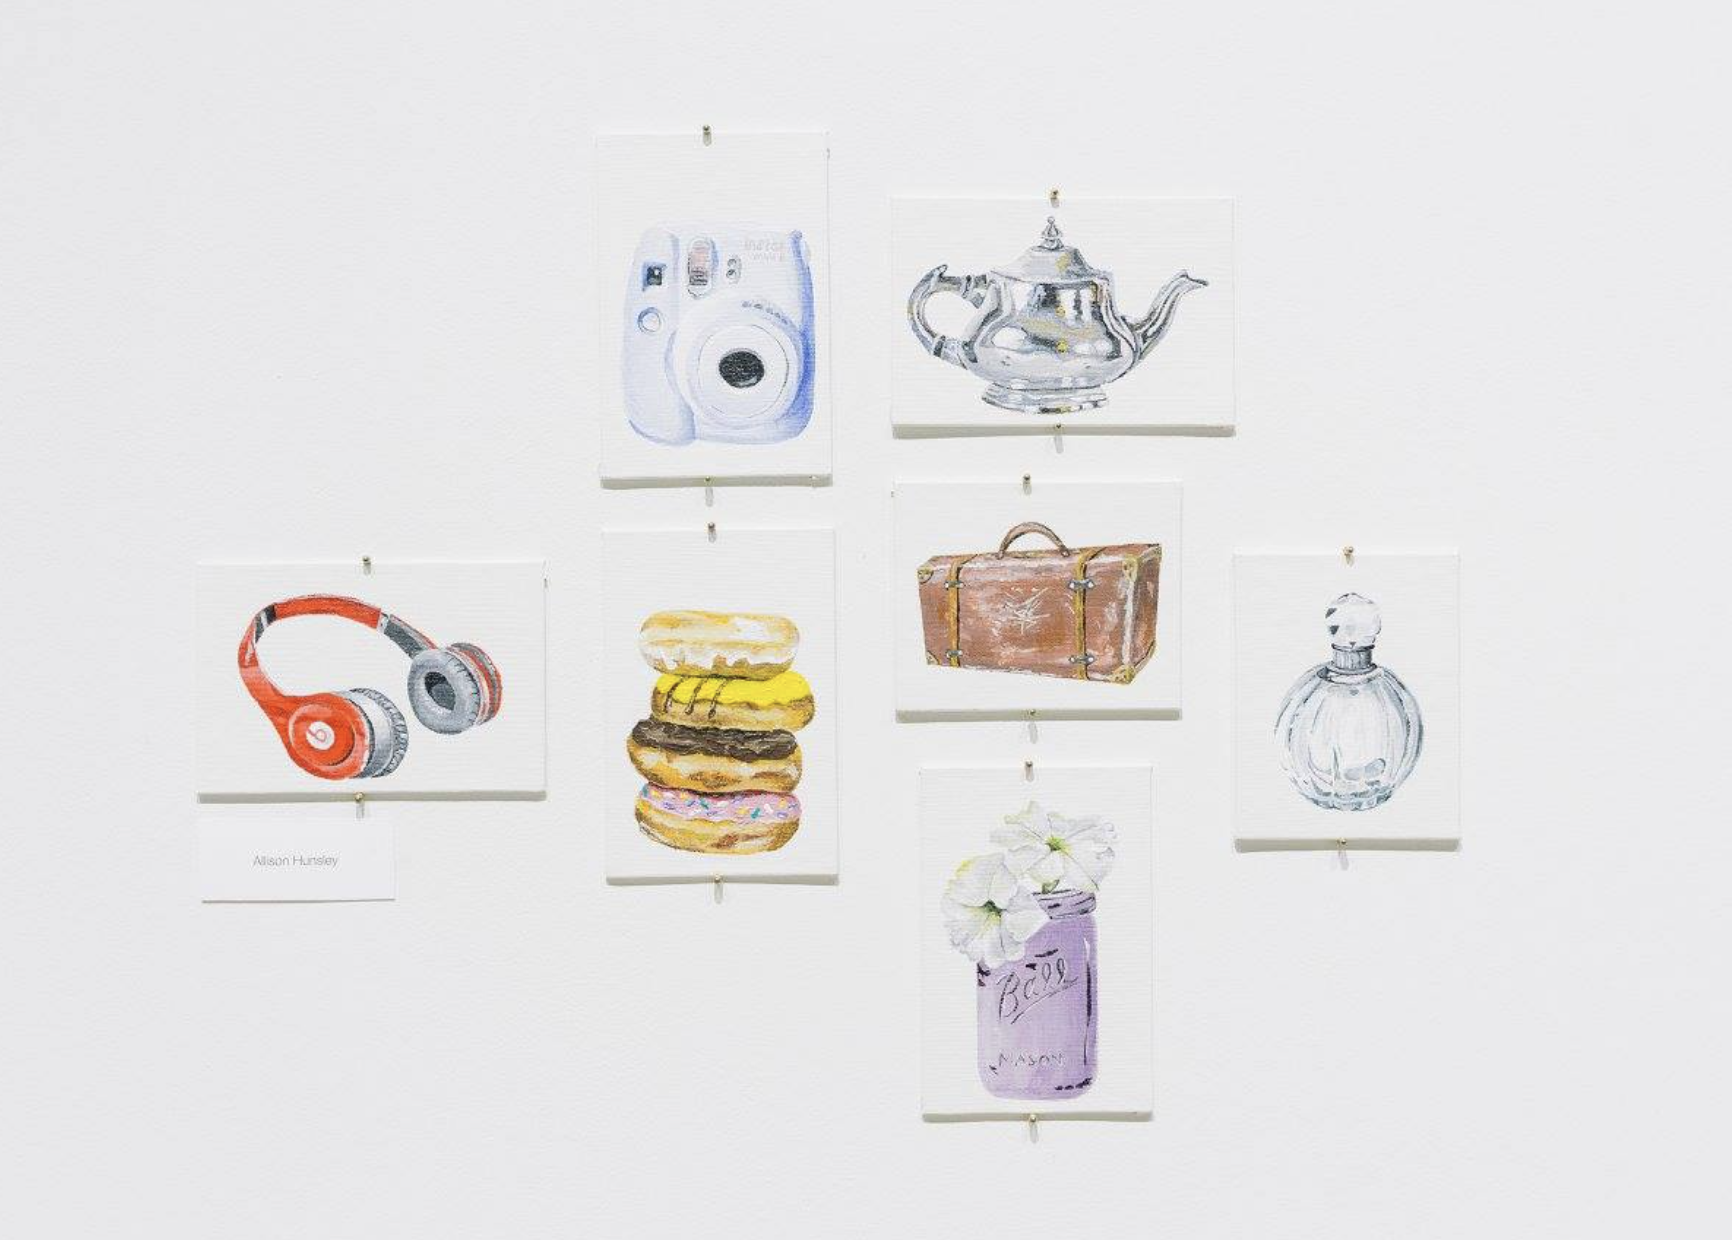 Painting student work featuring seven small paintings on a white wall. Objects in paintings include headphones, a stack of doughnuts, a vintage suitcase, a perfume bottle, a teapot, a jar of flowers, and a poloroid camera